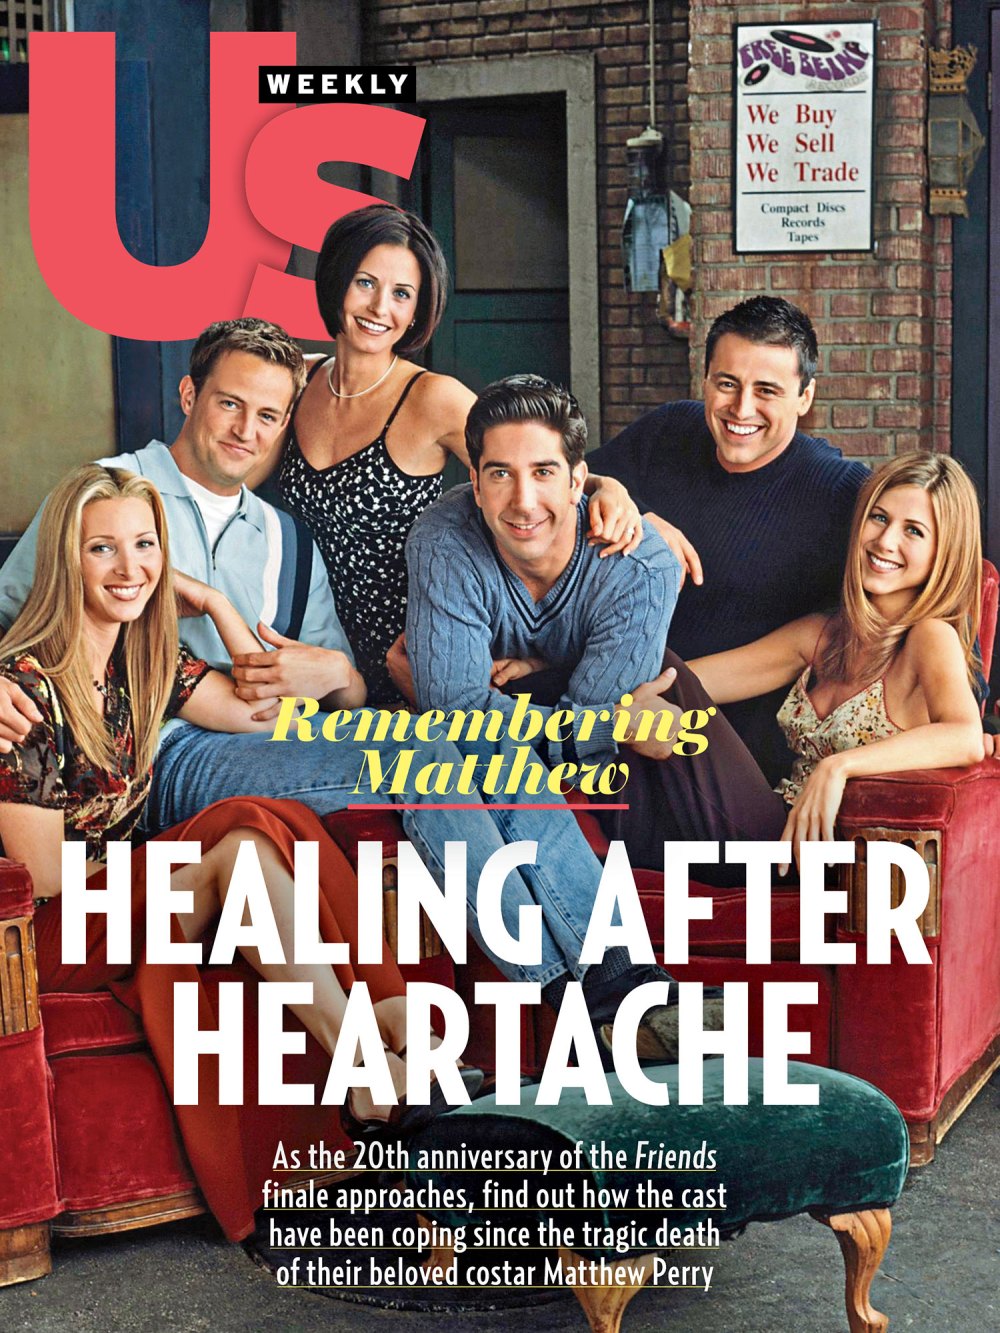 Friends 2419 Us Weekly Cover No Chip